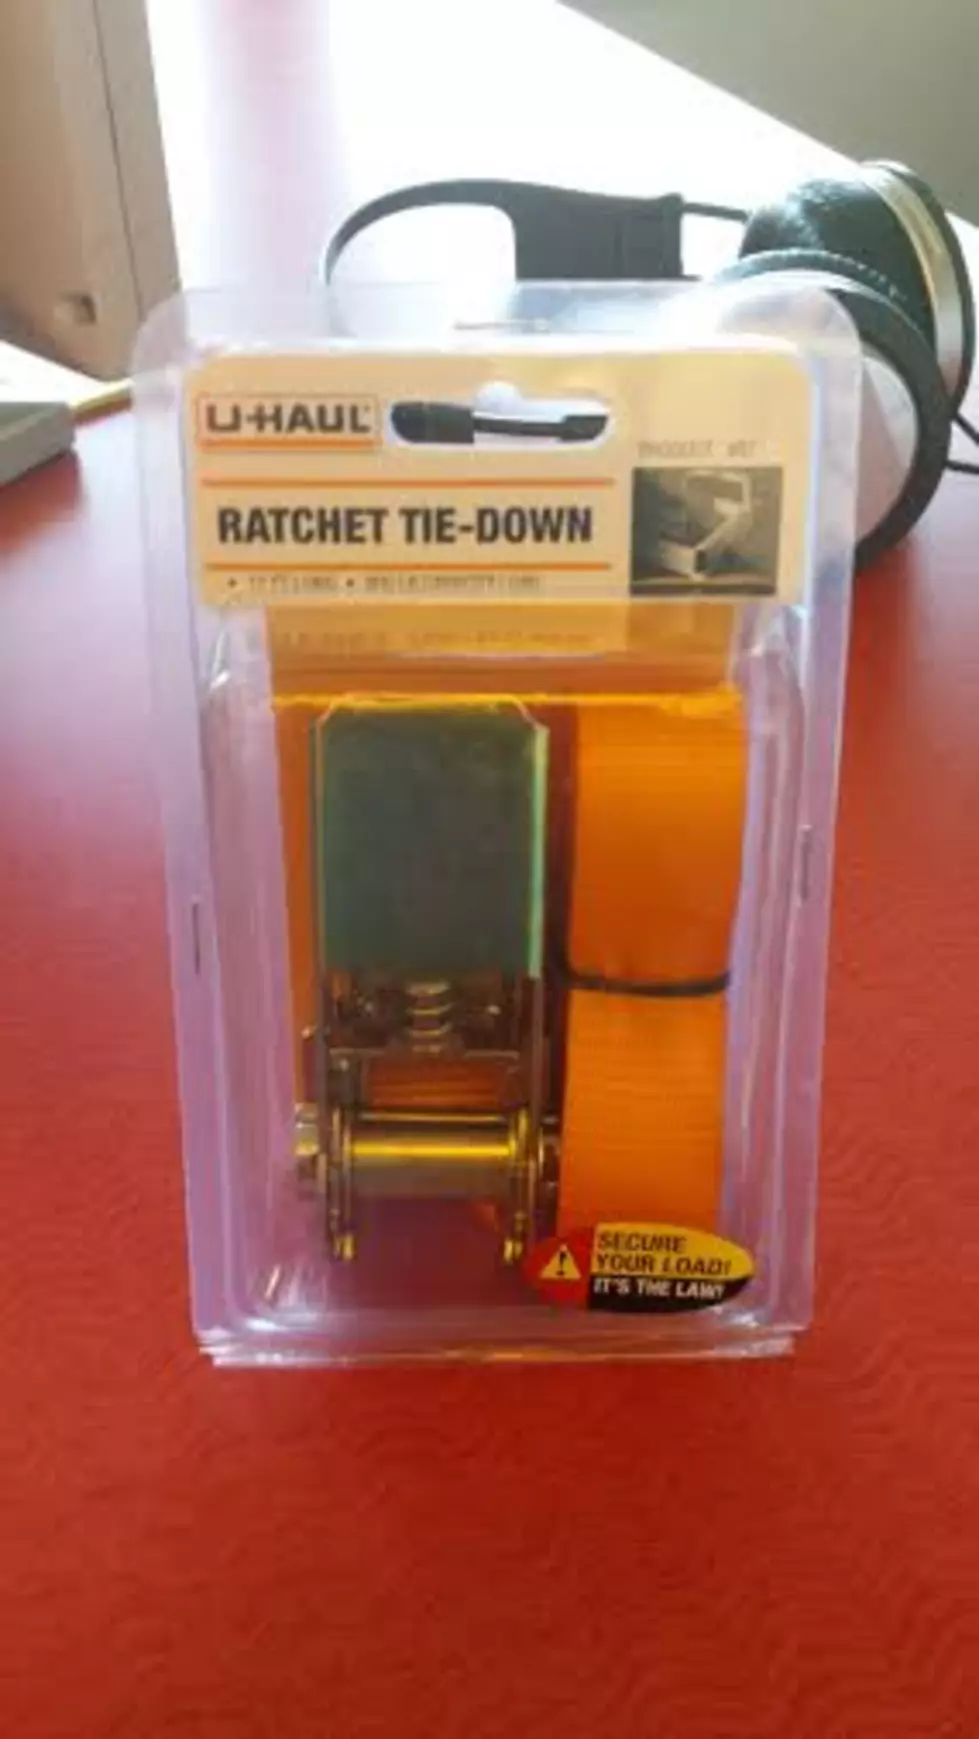 A Ratchet Tie Down, For What?